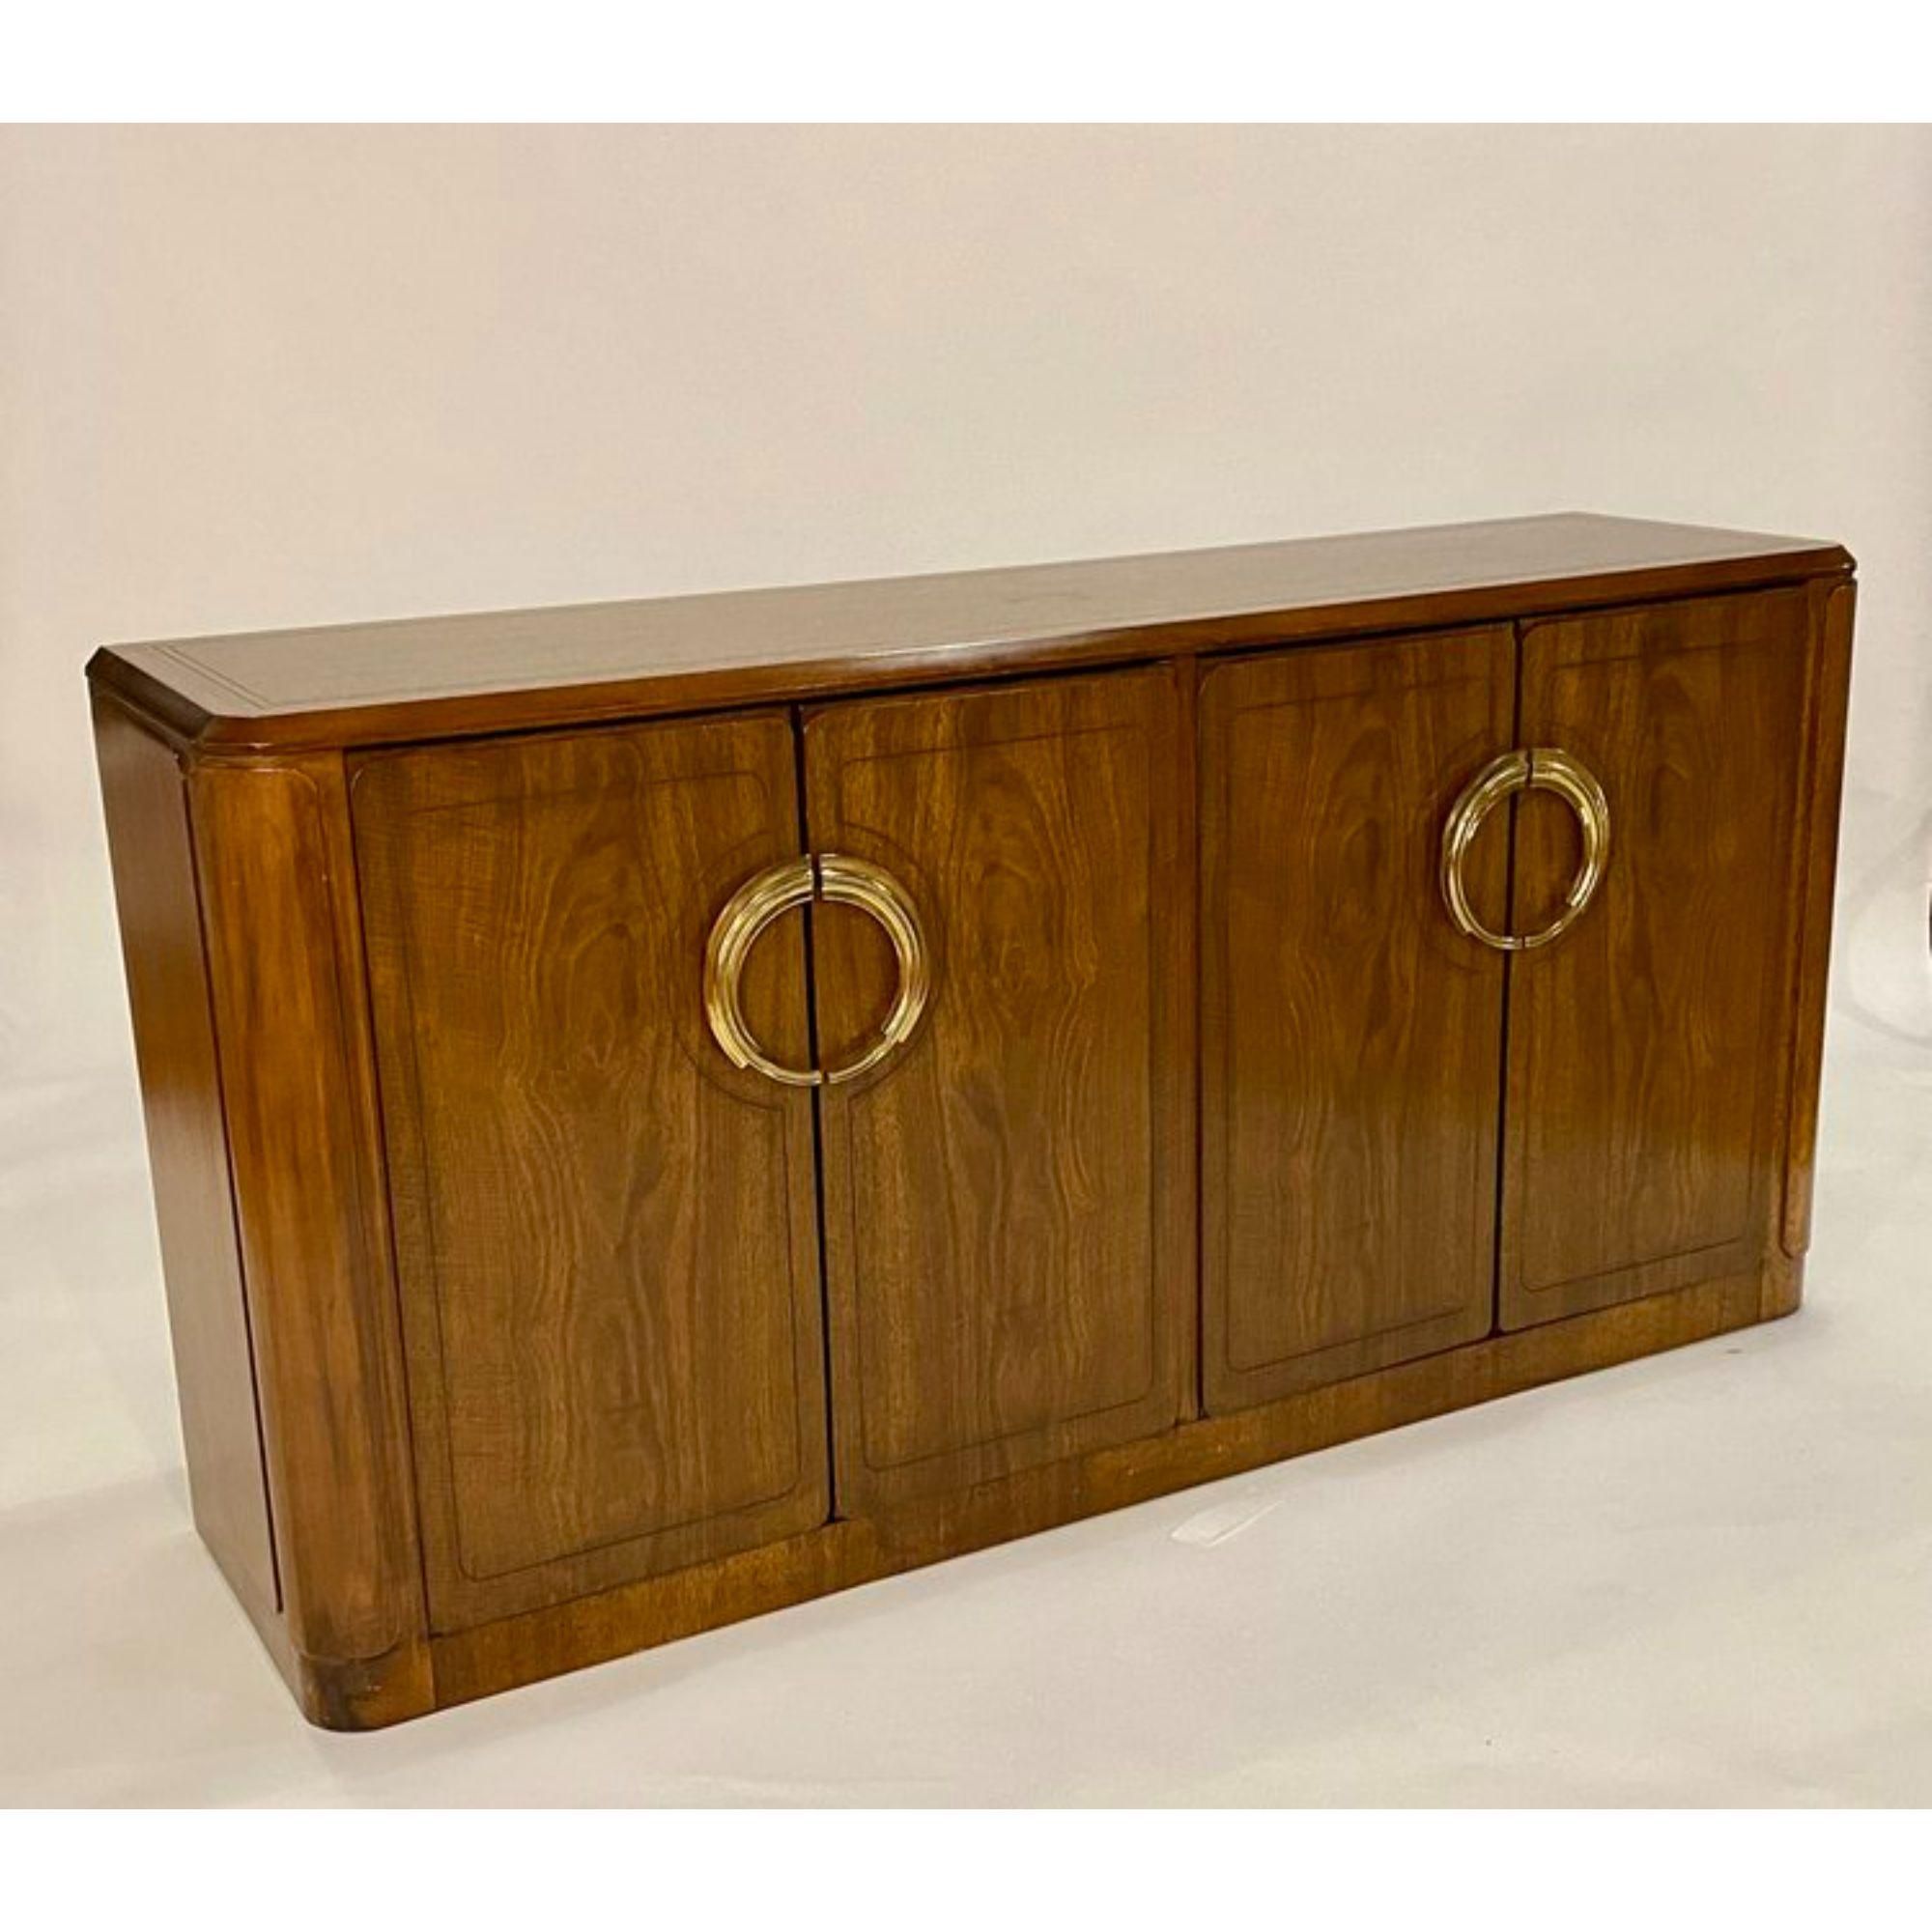 Stunning early 1980's Art Deco Revival design buffet by Baker. This credenza is well crafted from solid walnut with lovely details that wrap around the sides as well as ornamented brass handles which echo the designs of an Art Deco era. The